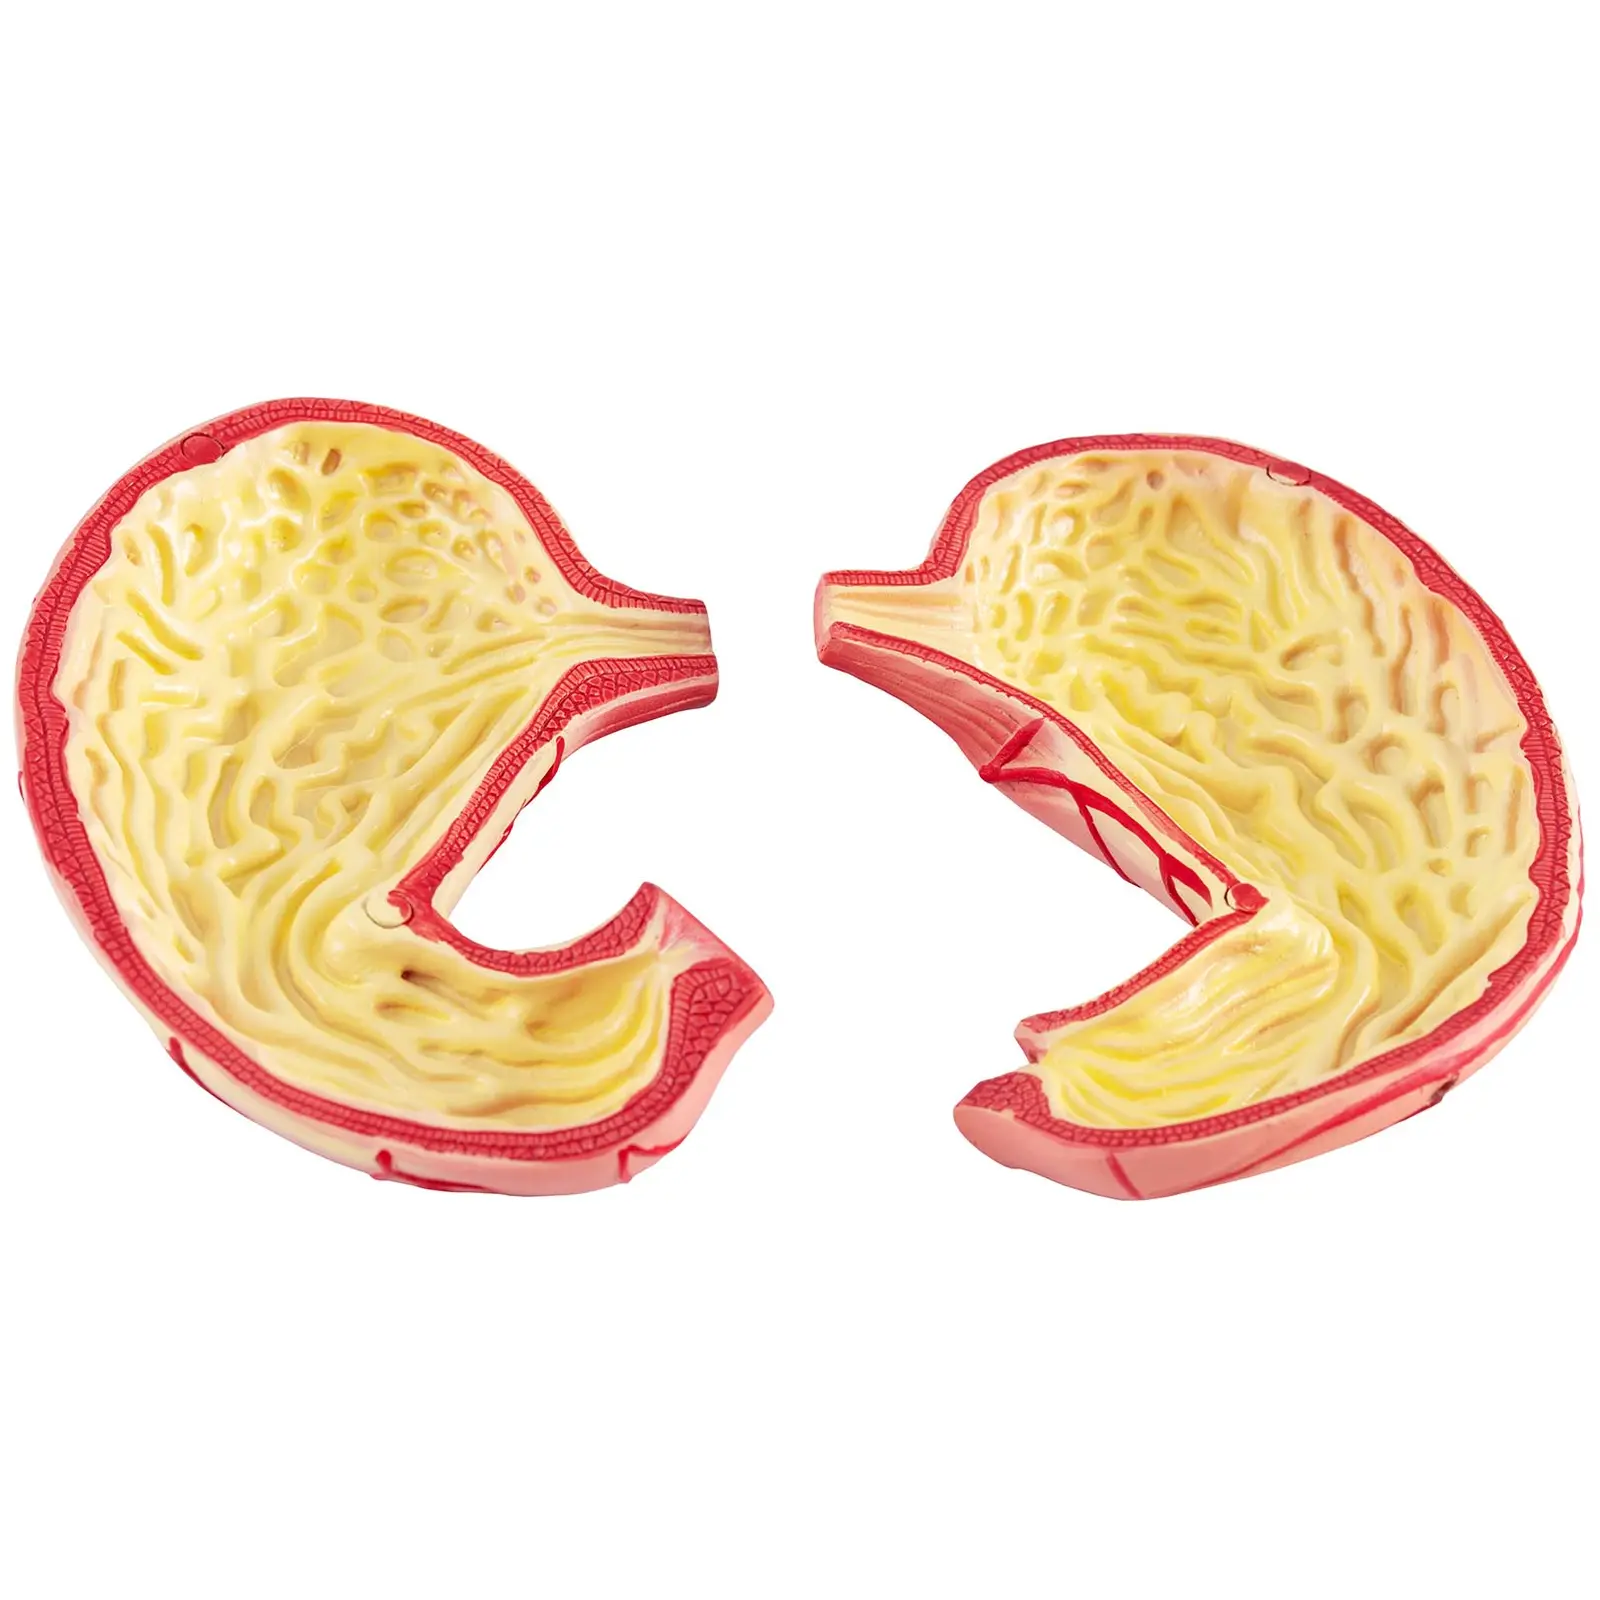 Stomach Model - separable into 2 pieces - life-sized